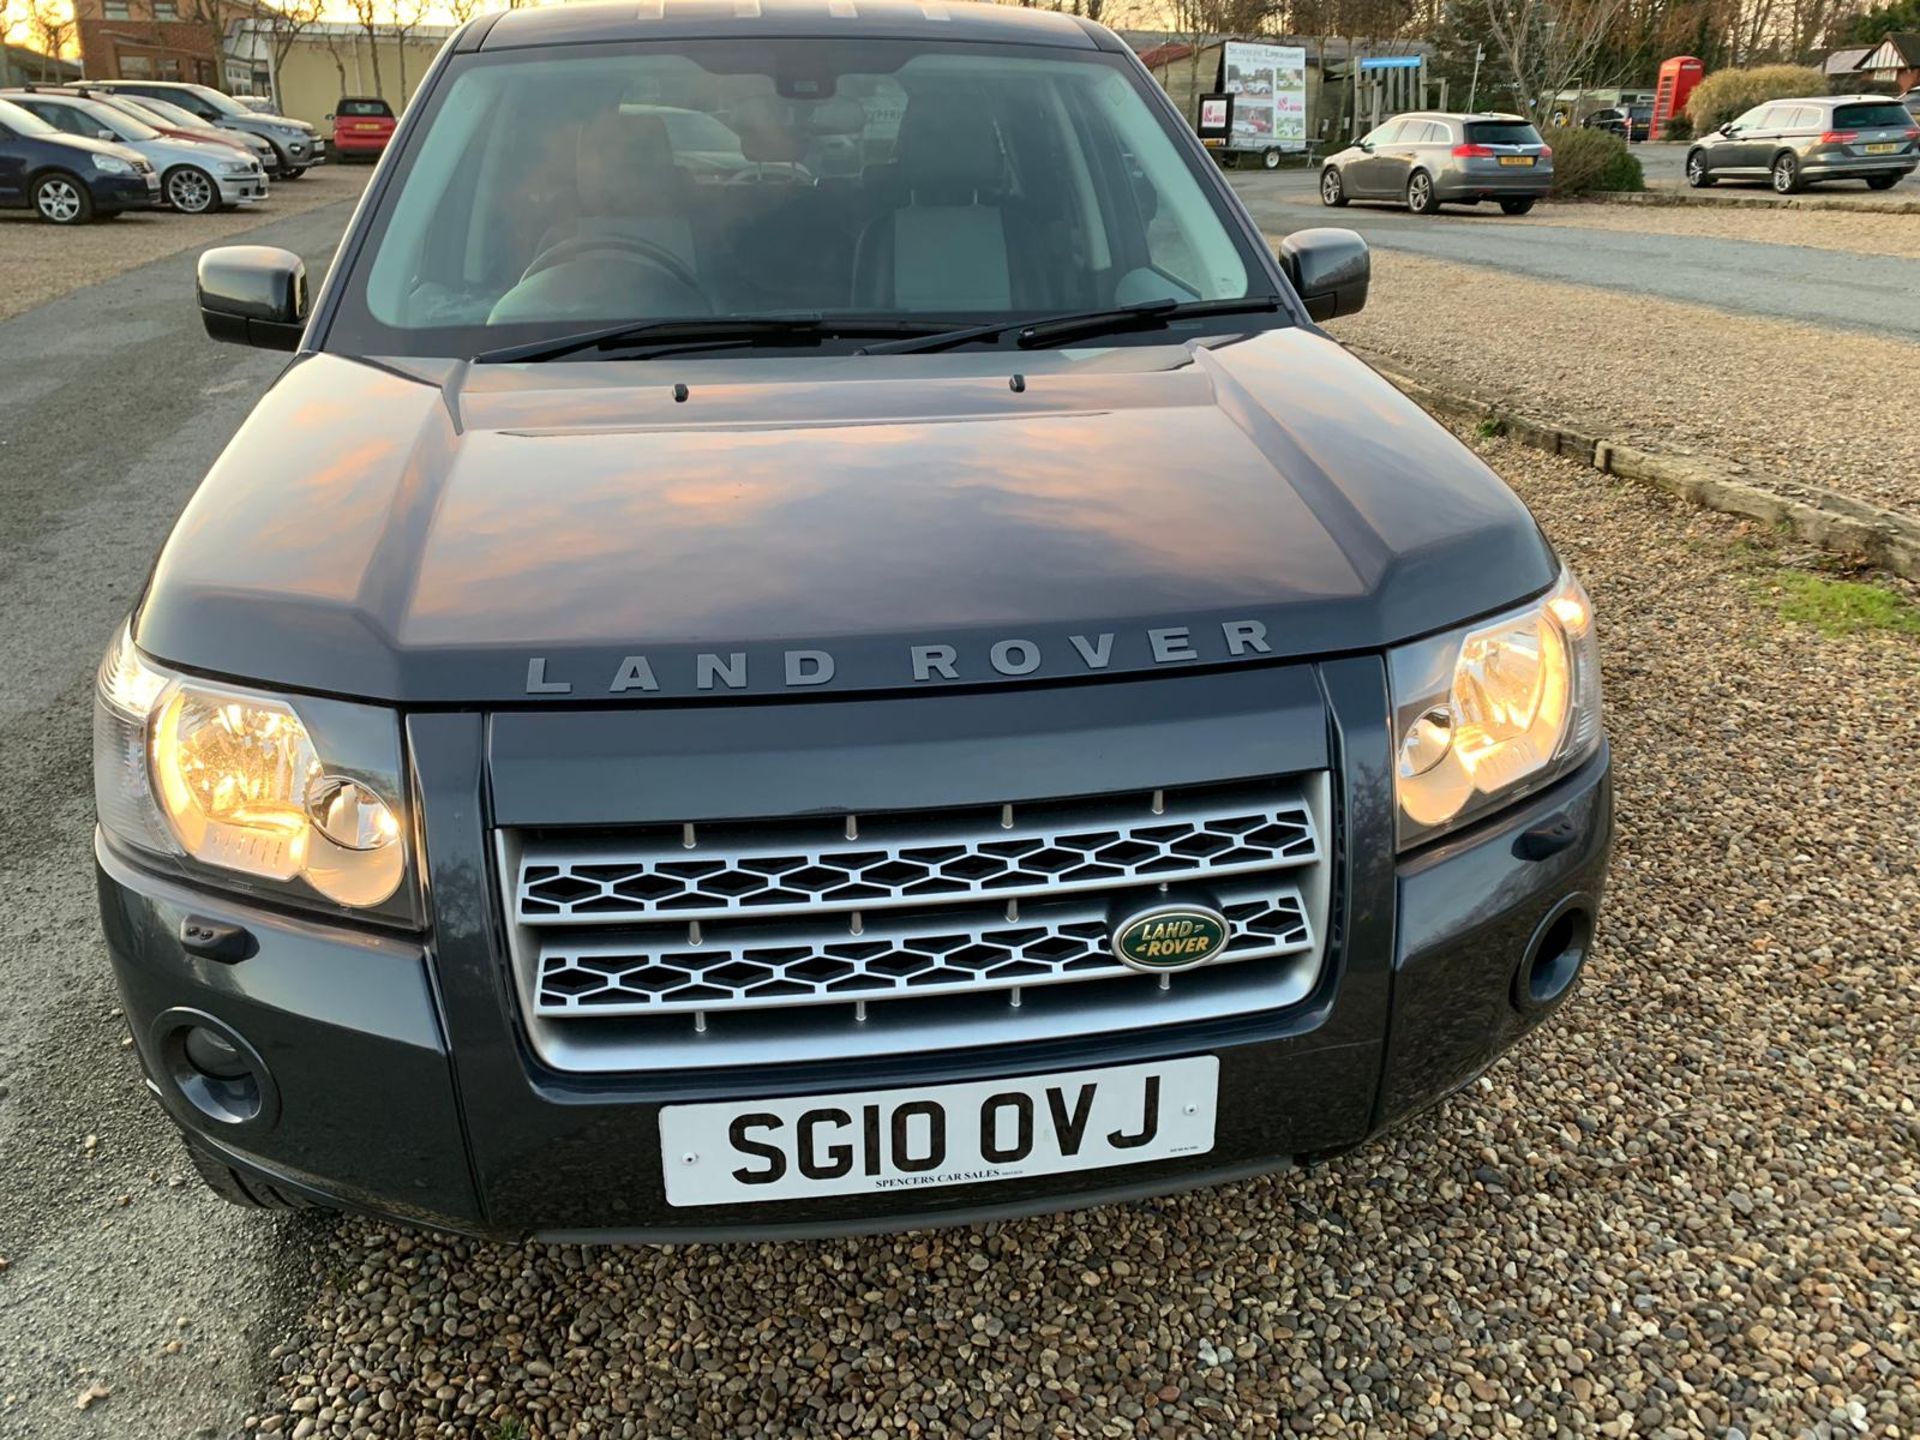 2010/10 REG LAND ROVER FREELANDER SPORT LE TD4 2.2 DIESEL AUTO 4X4, SHOWING 2 FORMER KEEPERS - Image 3 of 13